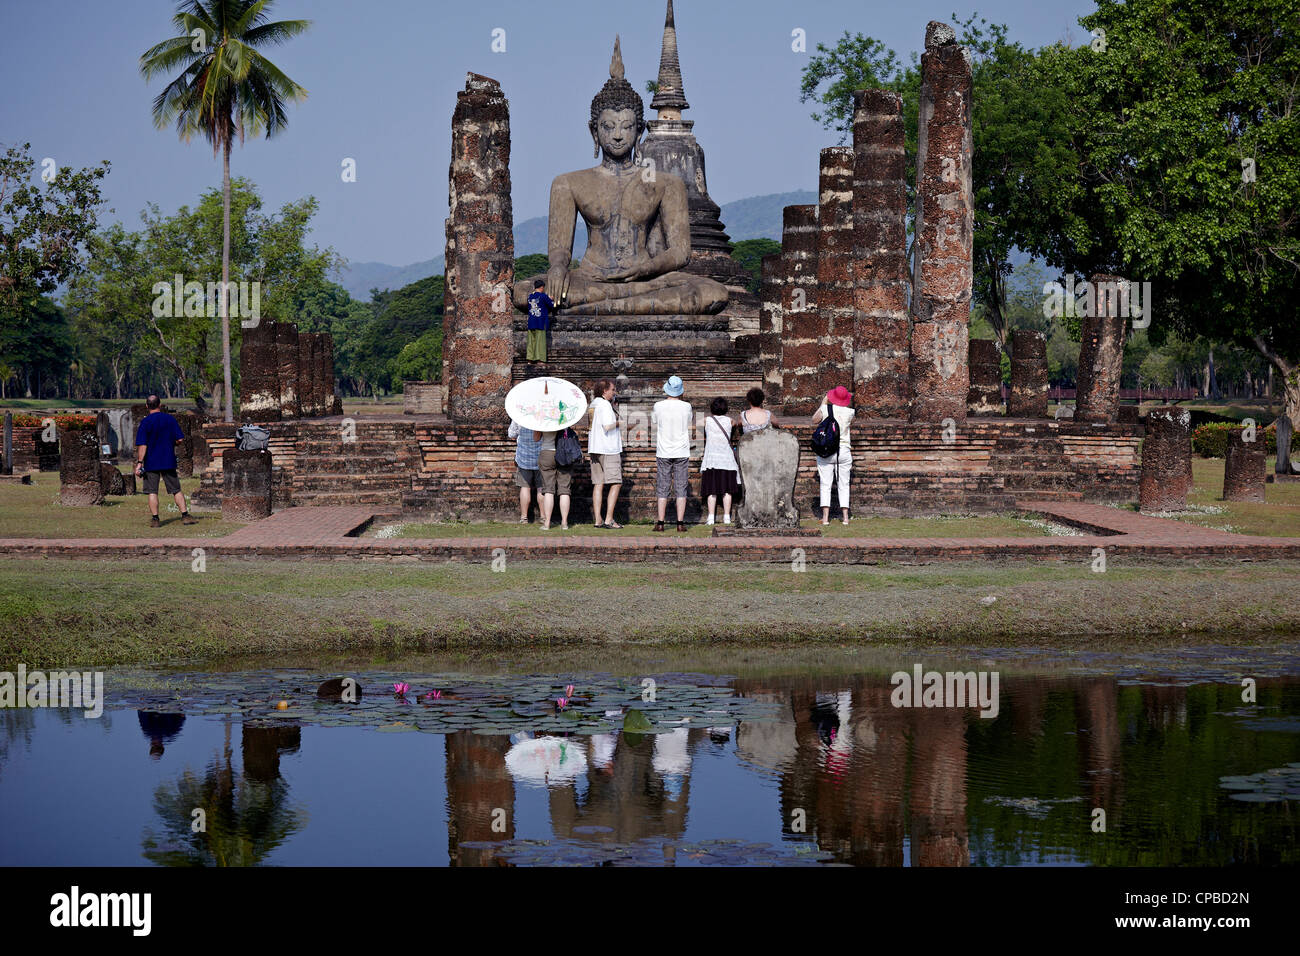 Wat Mahathat temple ruins Sukhothai. Tourists with Buddha statue. Capital of the Thailand Kingdom in the 13th and 14th centuries Thailand tourism Stock Photo